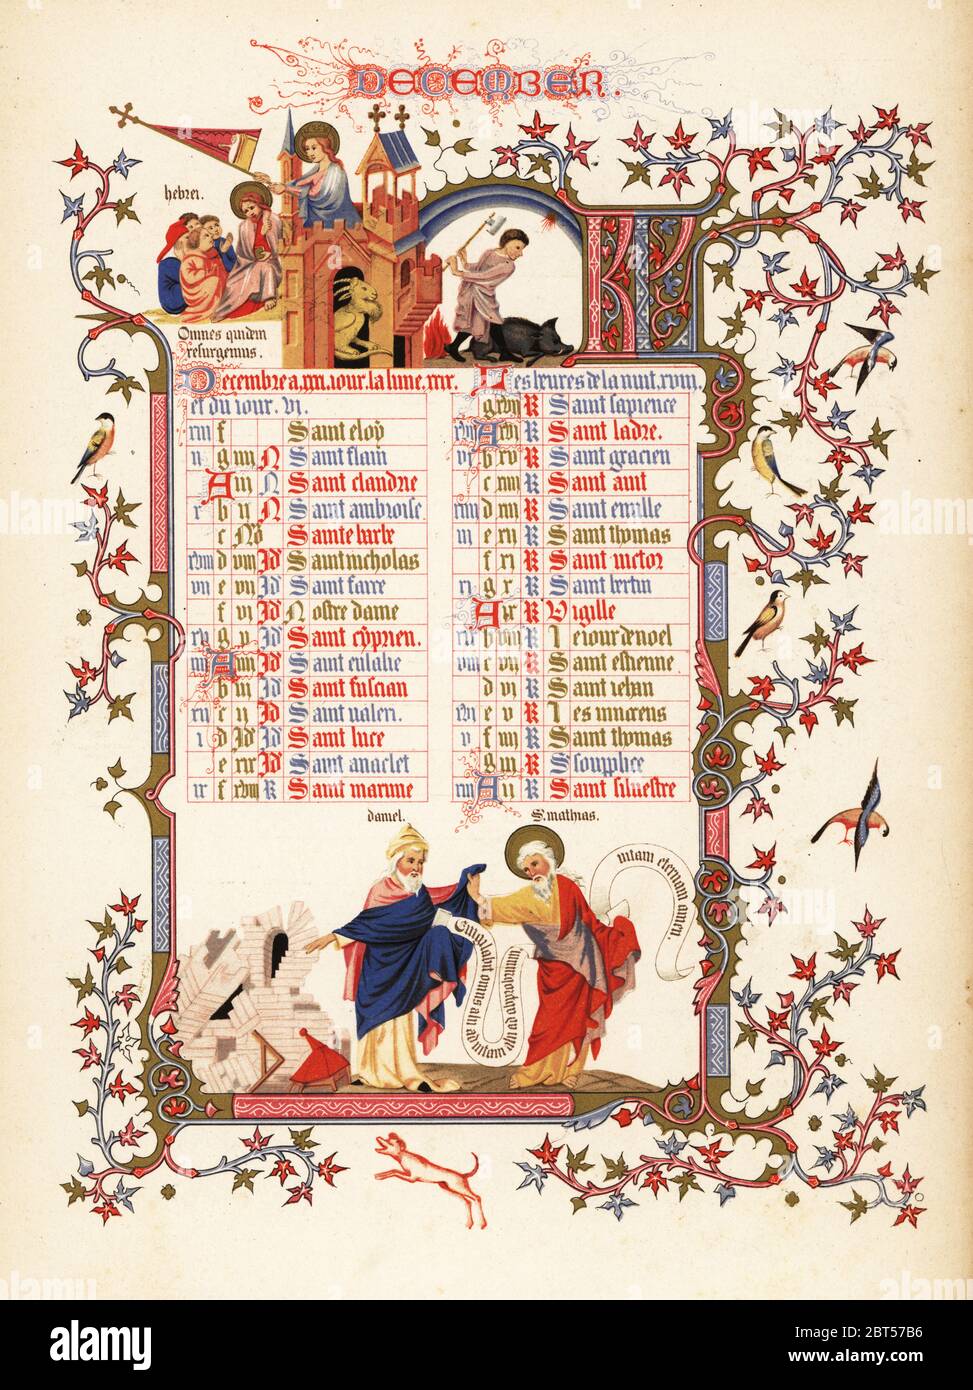 Calendar for December with figures of Daniel and St. Matthew, quote from Epistle to the Hebrews, disciples, man slaying a boar with an axe, goat, dog, birds, foliage and castles. From an illuminated Book of Hours of the Duke the Anjou., 1380. Chromolithograph in colors and gilt from Henry Noel Humphreys The Illuminated Calendar and Home Diary for 1846, Longmon, London, 1846. Stock Photo